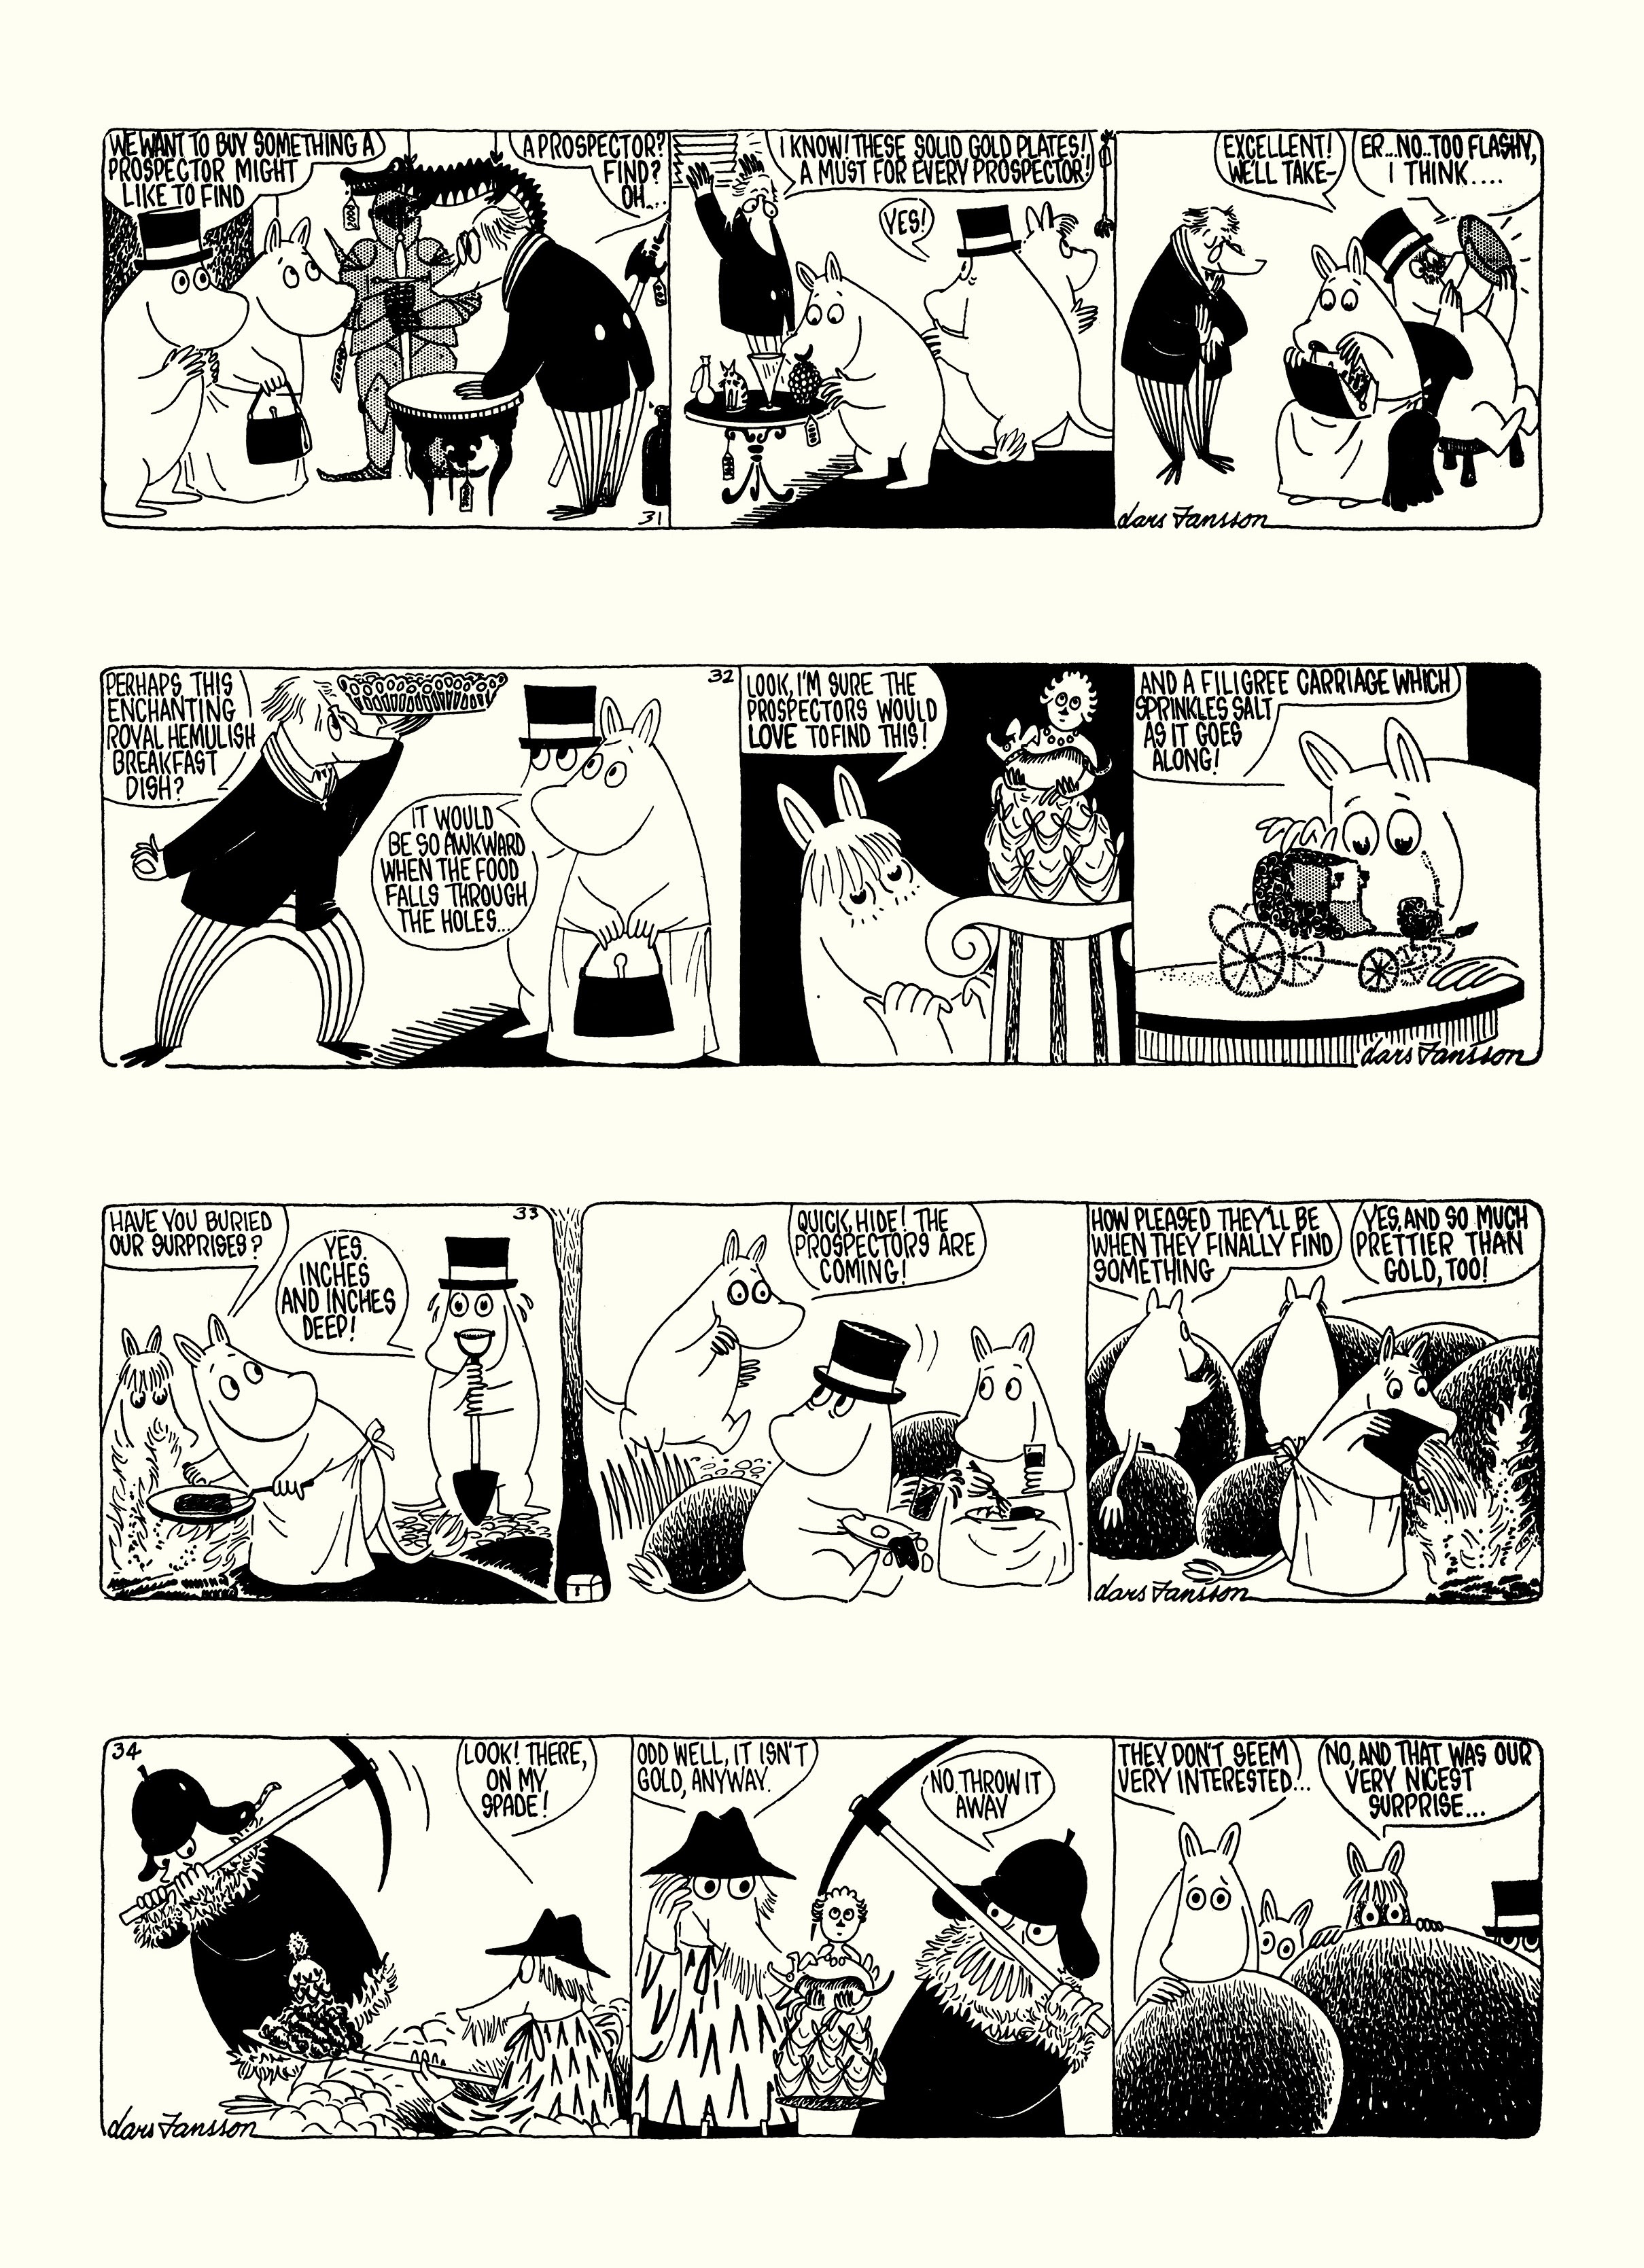 Read online Moomin: The Complete Lars Jansson Comic Strip comic -  Issue # TPB 7 - 77